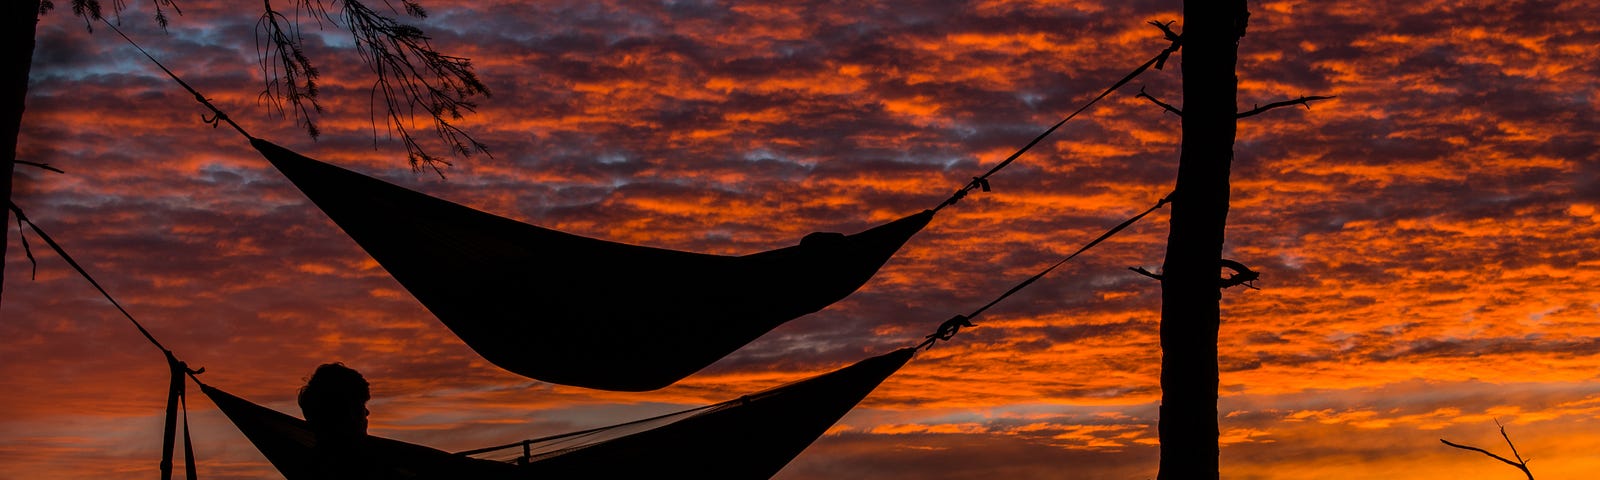 Image of two hammocks in front of a sunset sky.